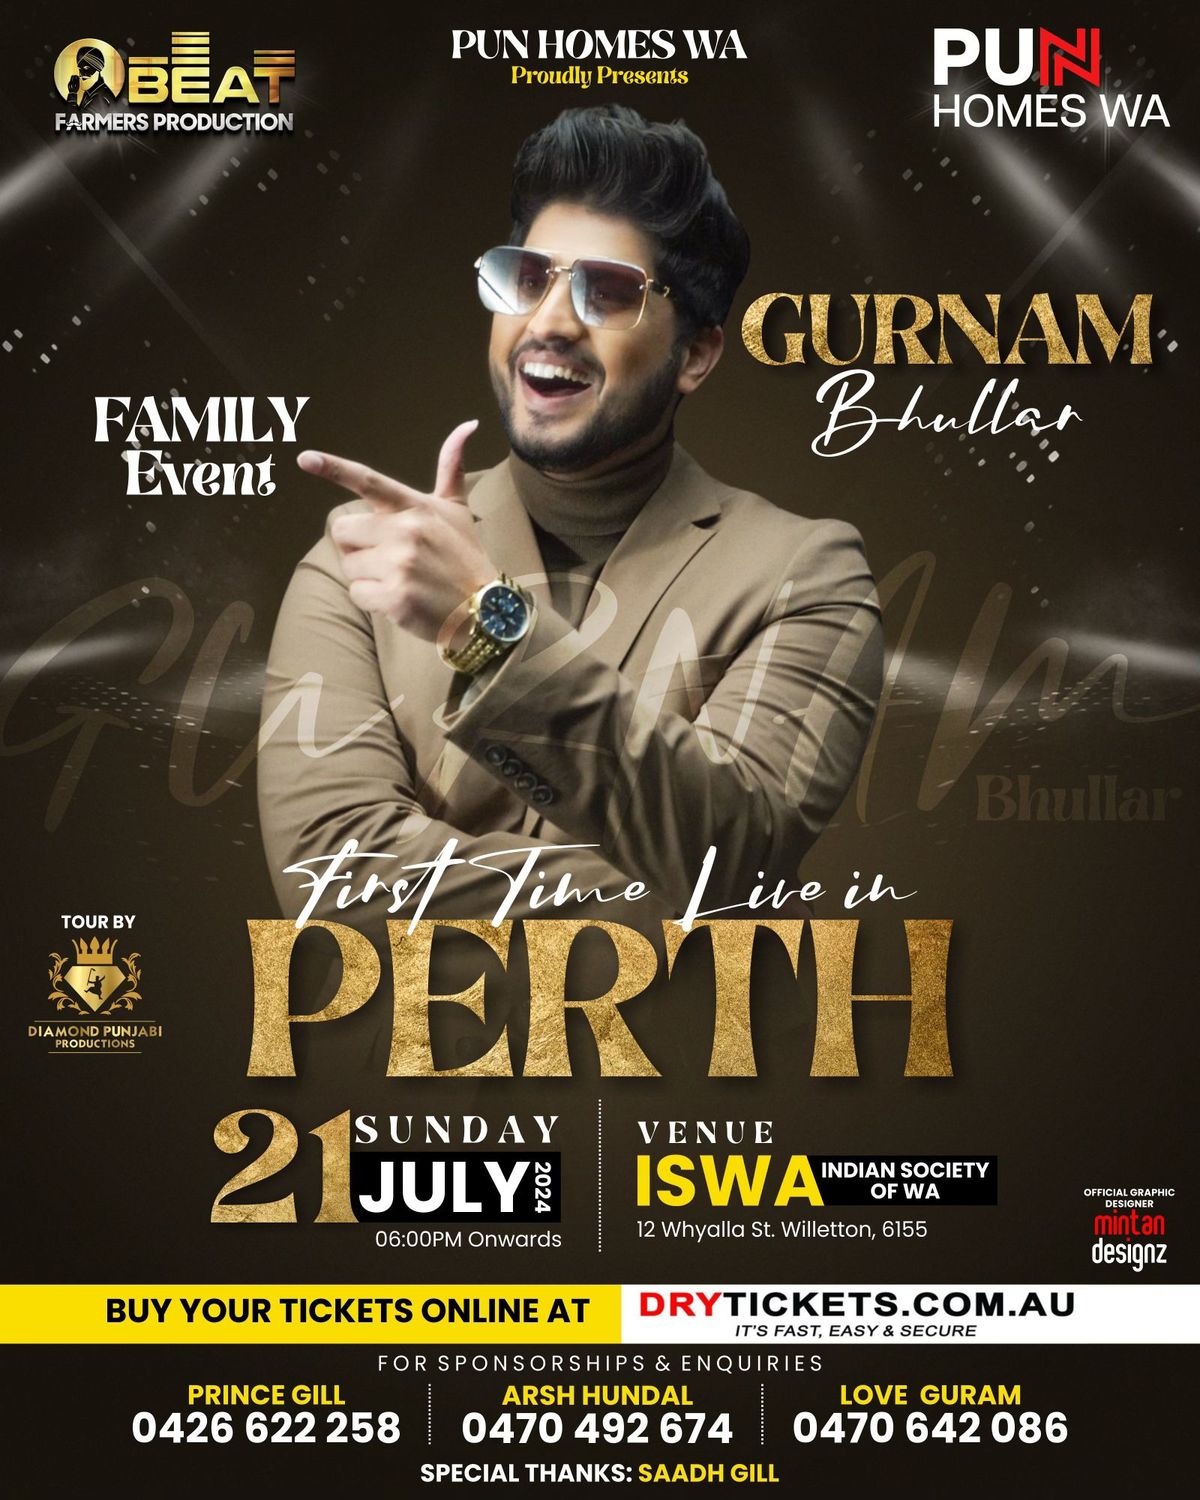 Perth, get ready for an unforgettable night! \ud83c\udf1f Gurnam Bhullar is coming to town for a live concert 